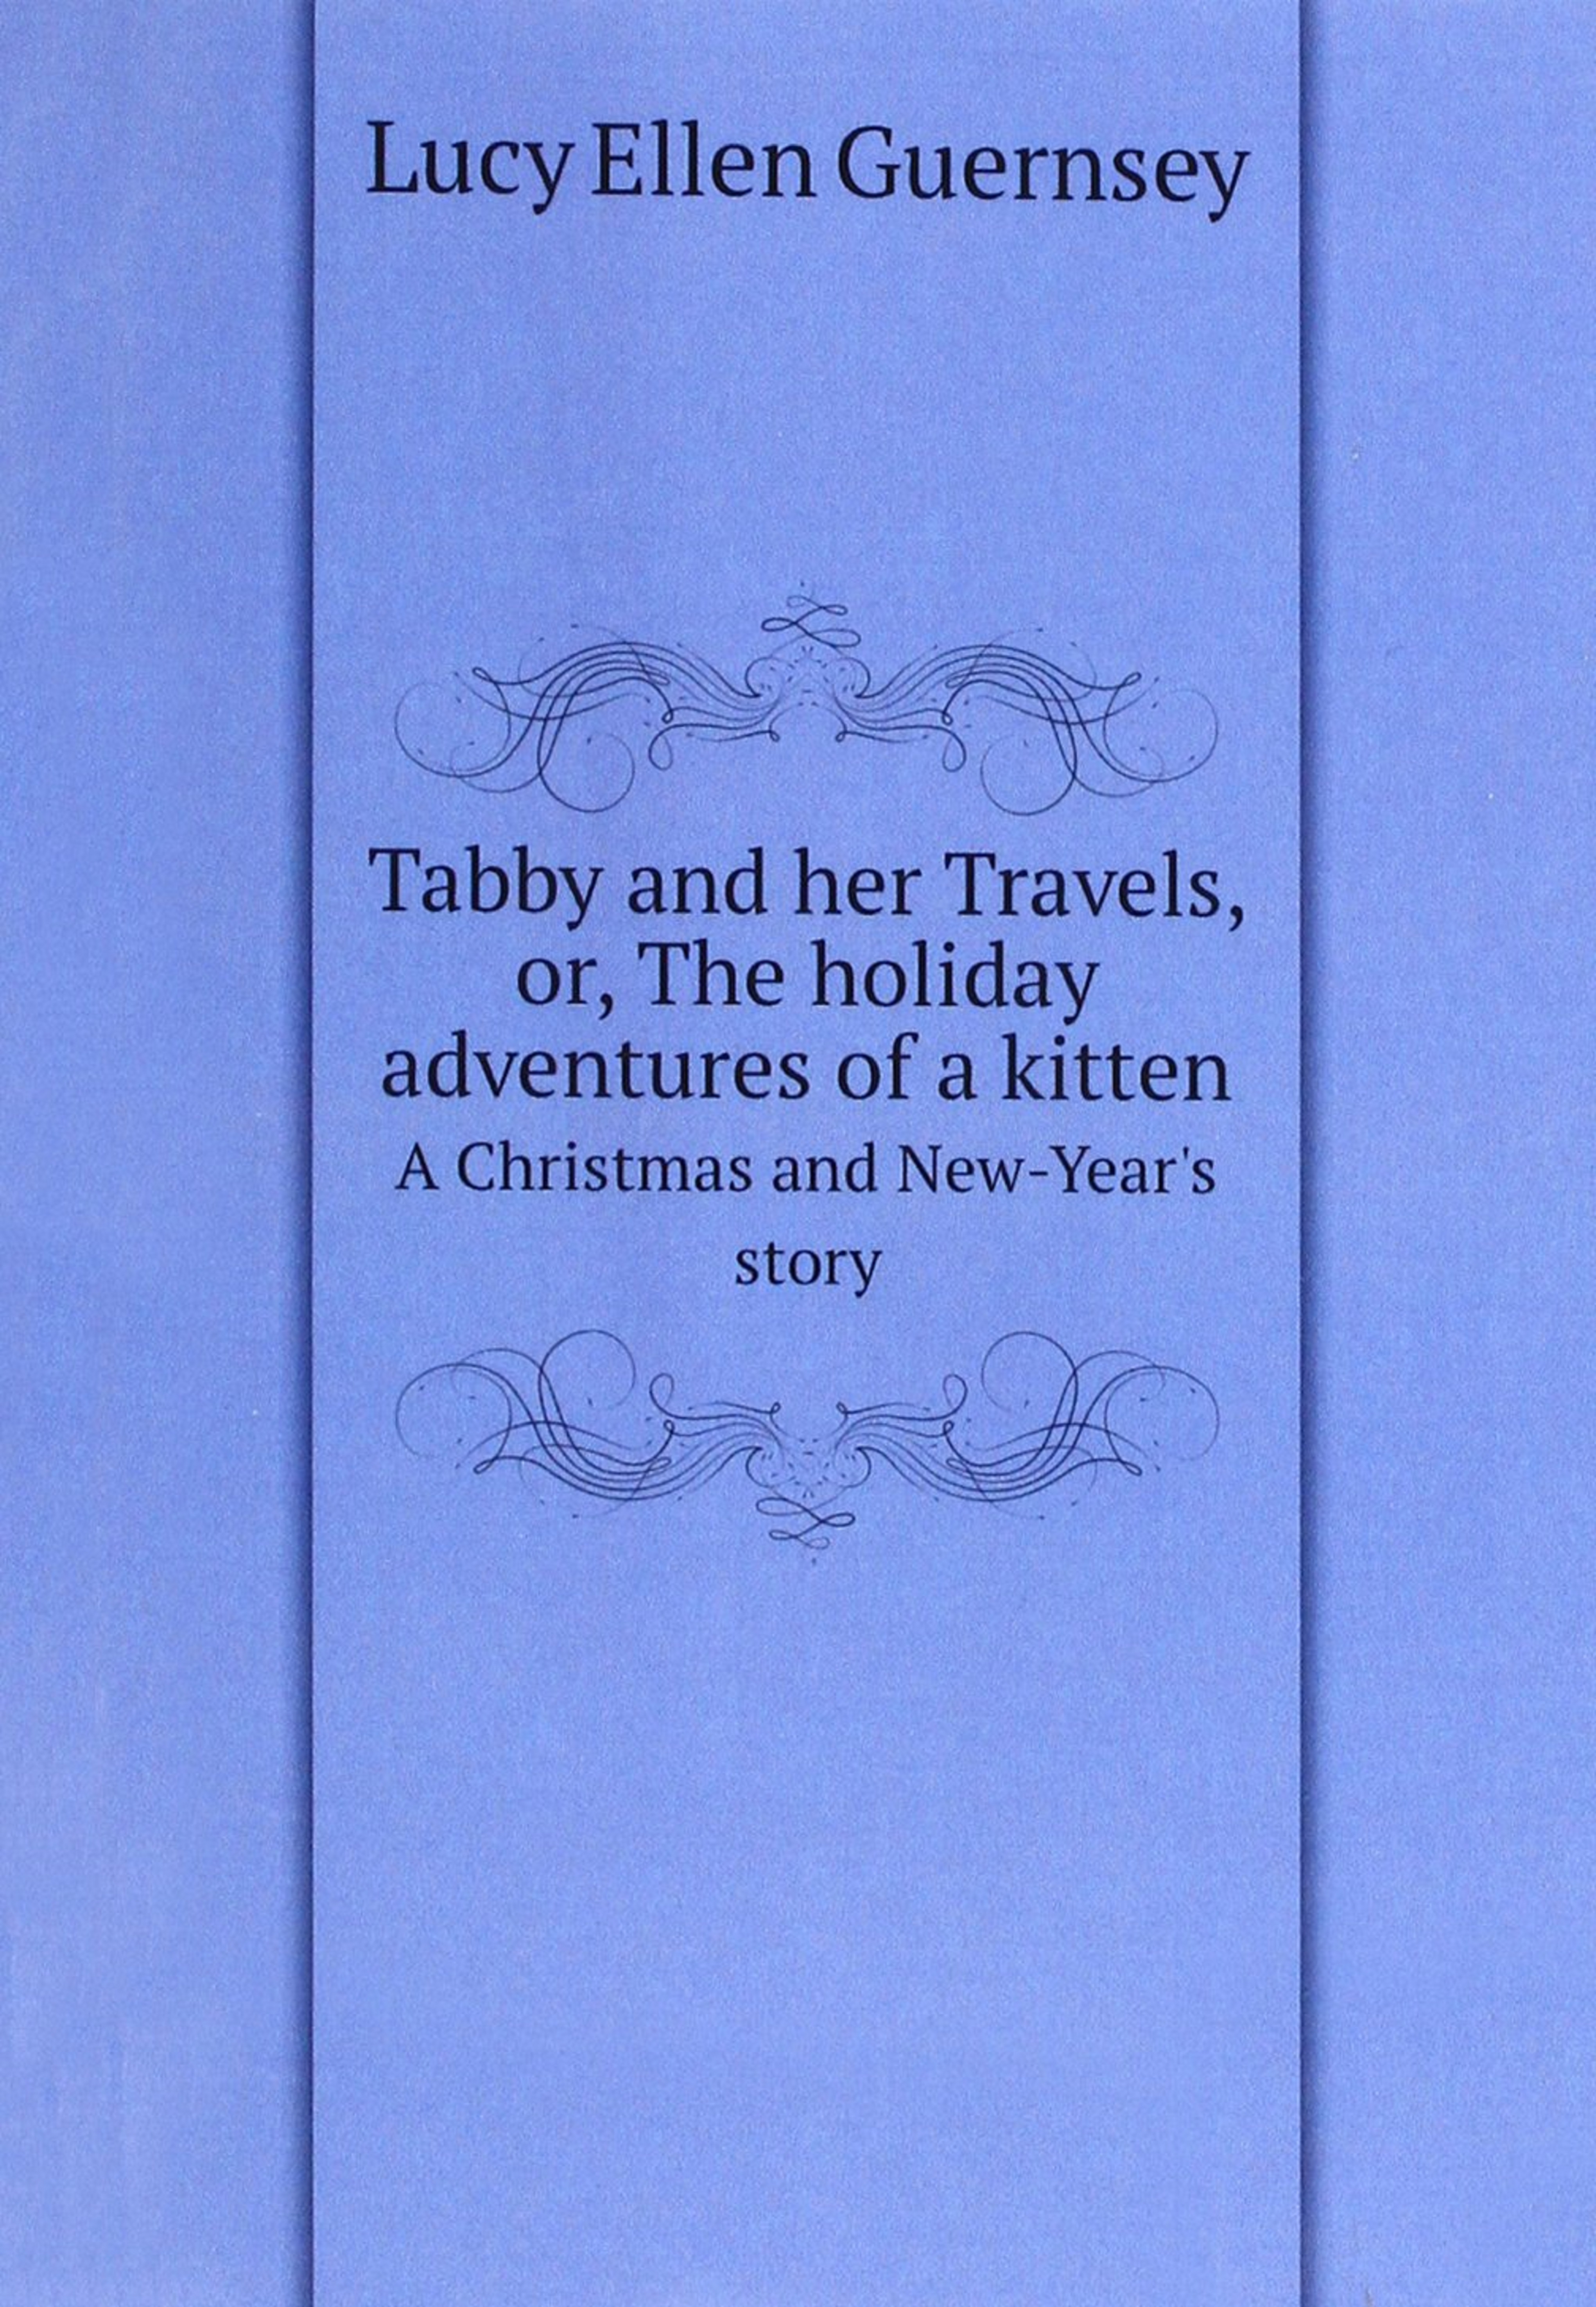 Tabby and her Travels, or, The holiday adventures of a kitten